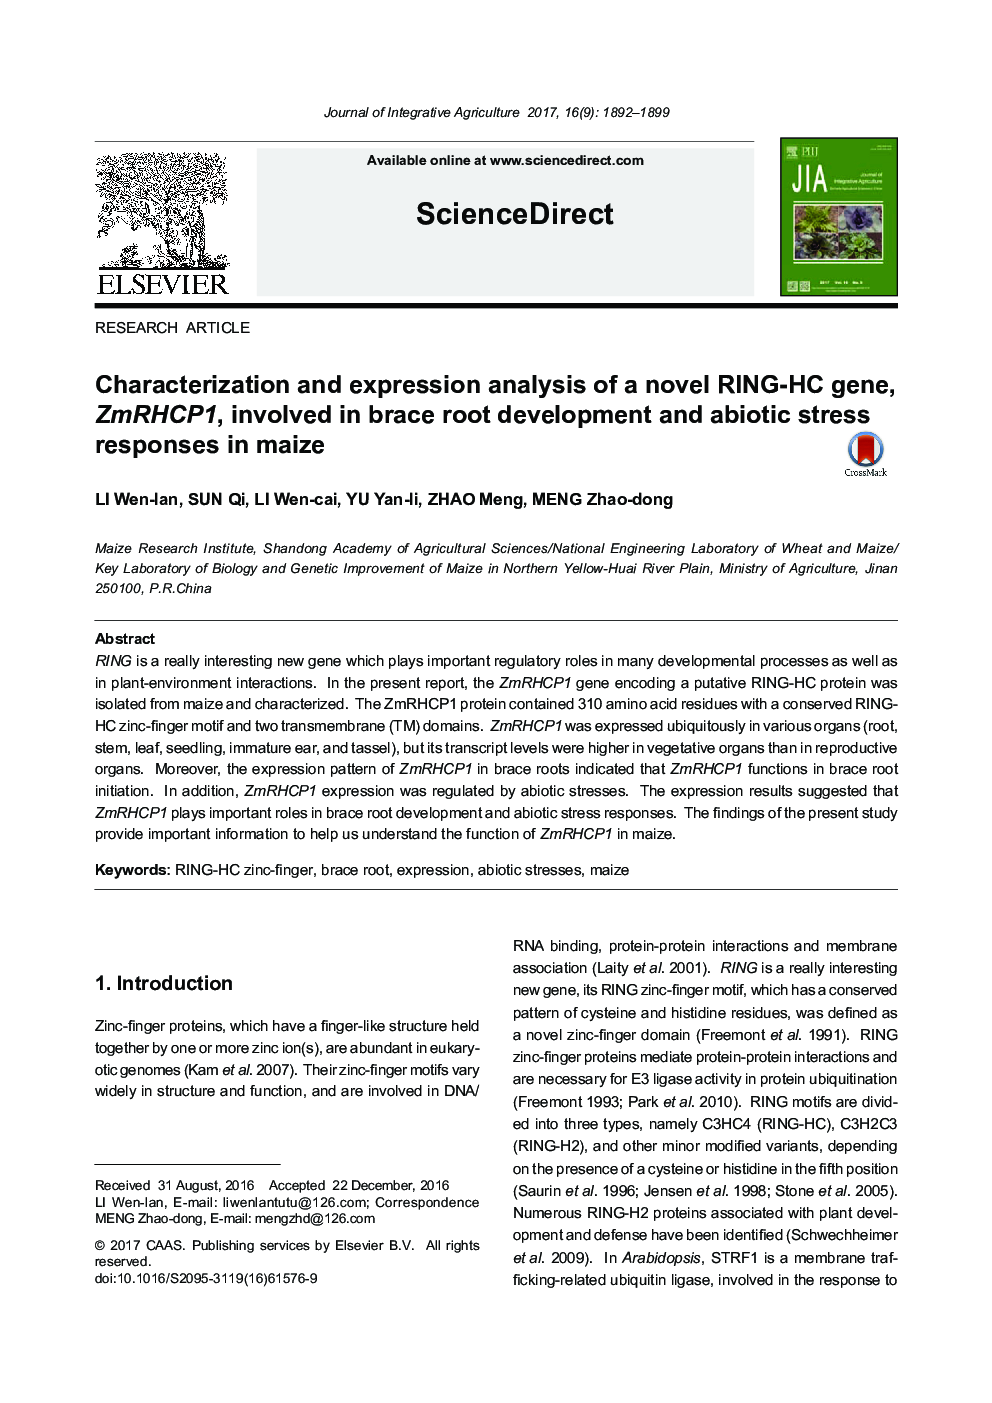 Characterization and expression analysis of a novel RING-HC gene, ZmRHCP1, involved in brace root development and abiotic stress responses in maize